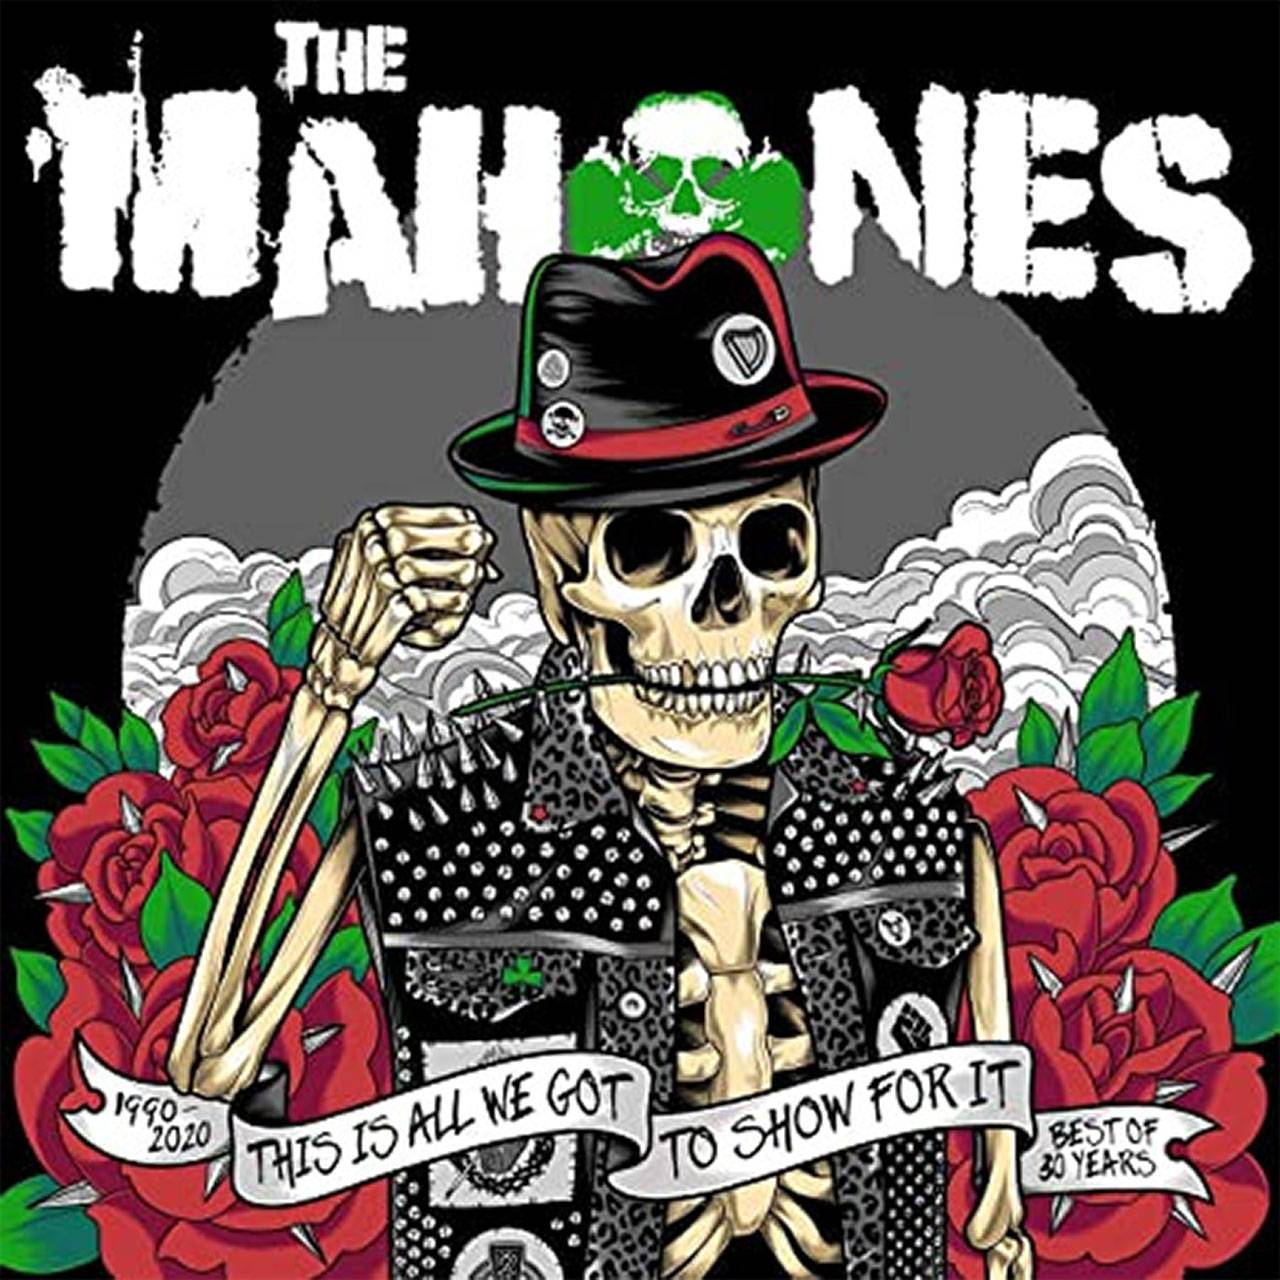 The Mahones - This Is All We Got To Show For It